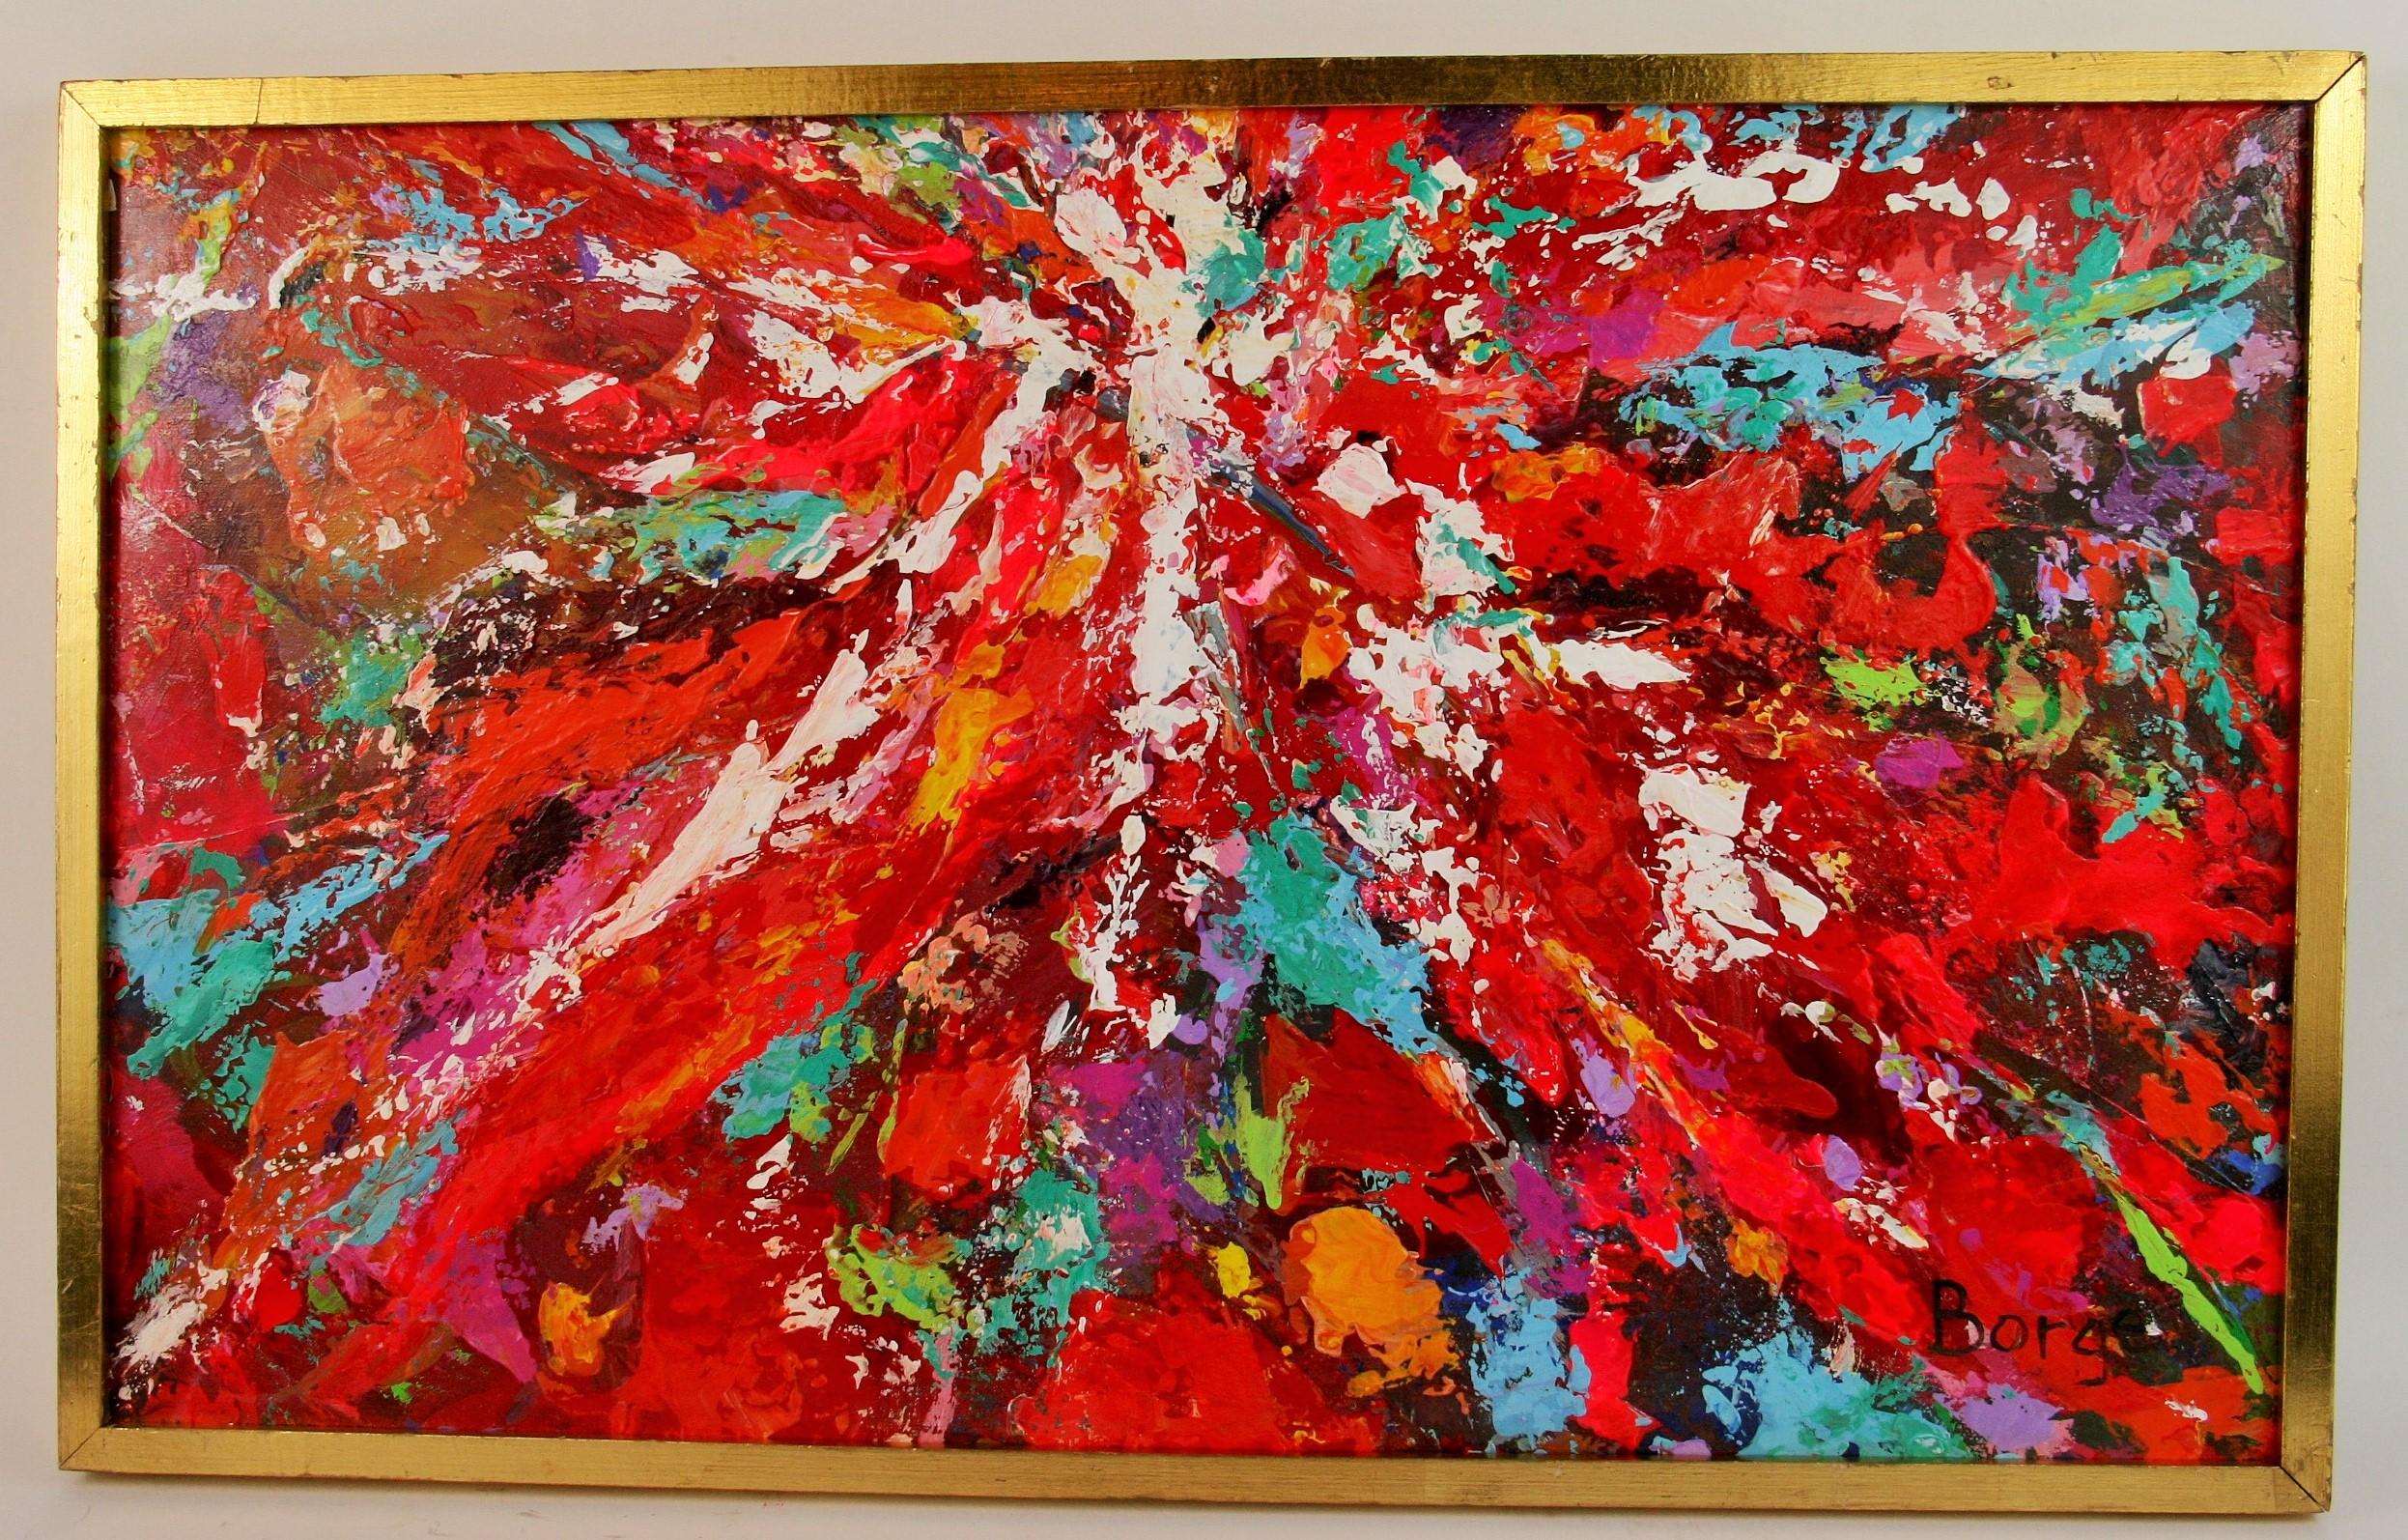 Borge Abstract Painting - Abstract Expressionist Bold Red  Painting